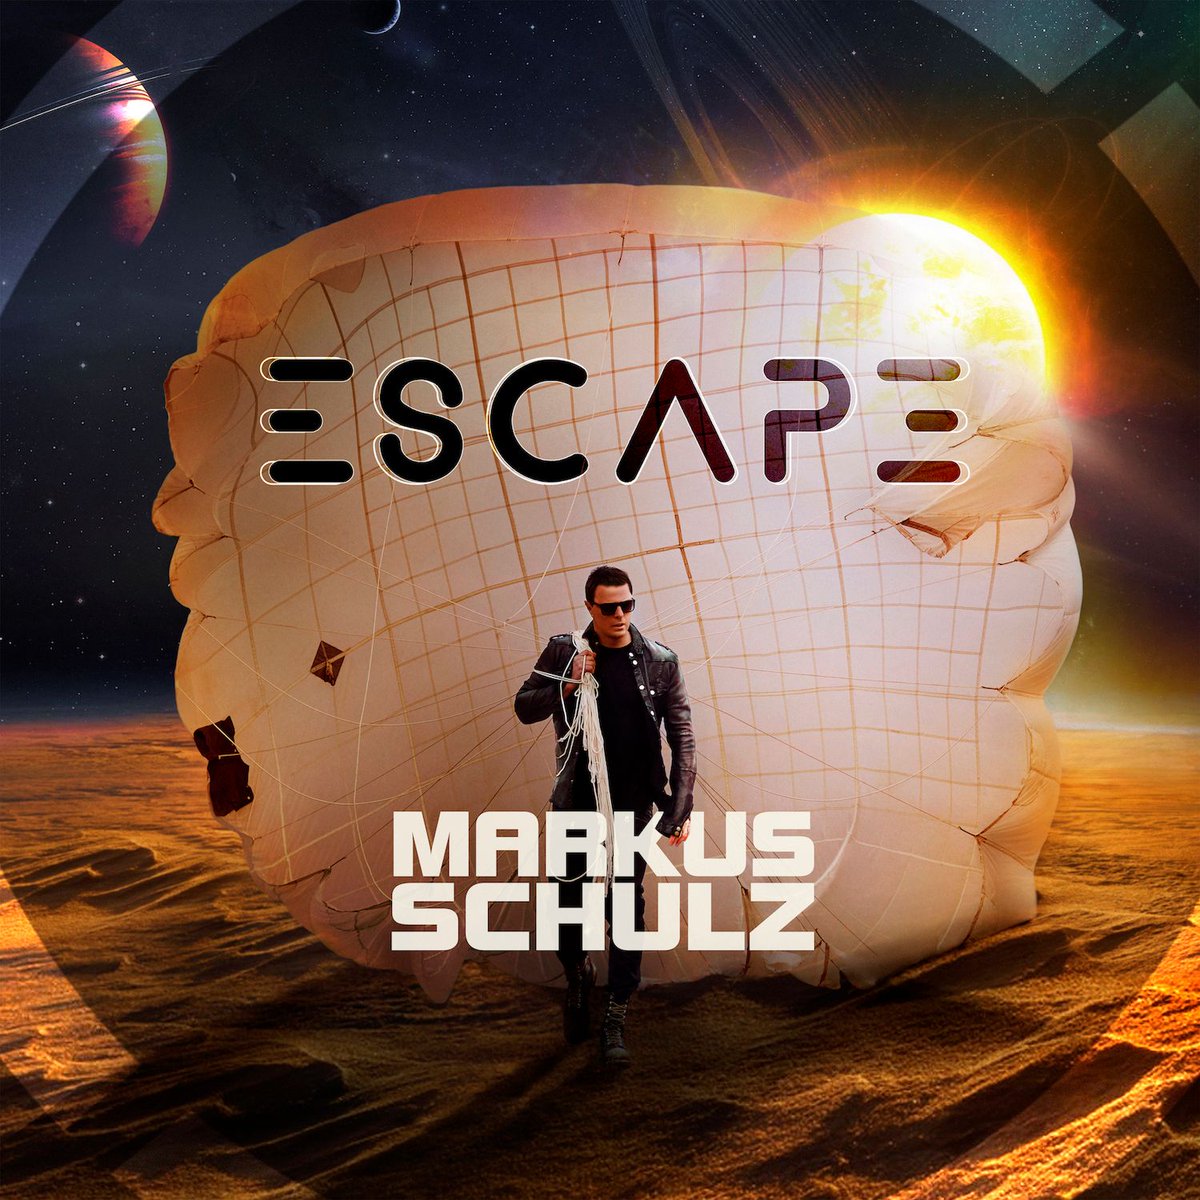 Release day Markus Schulz 'Escape' featuring JES, Christian Burns and many more is now available at Magik Muzik Shop buff.ly/33qOfcH